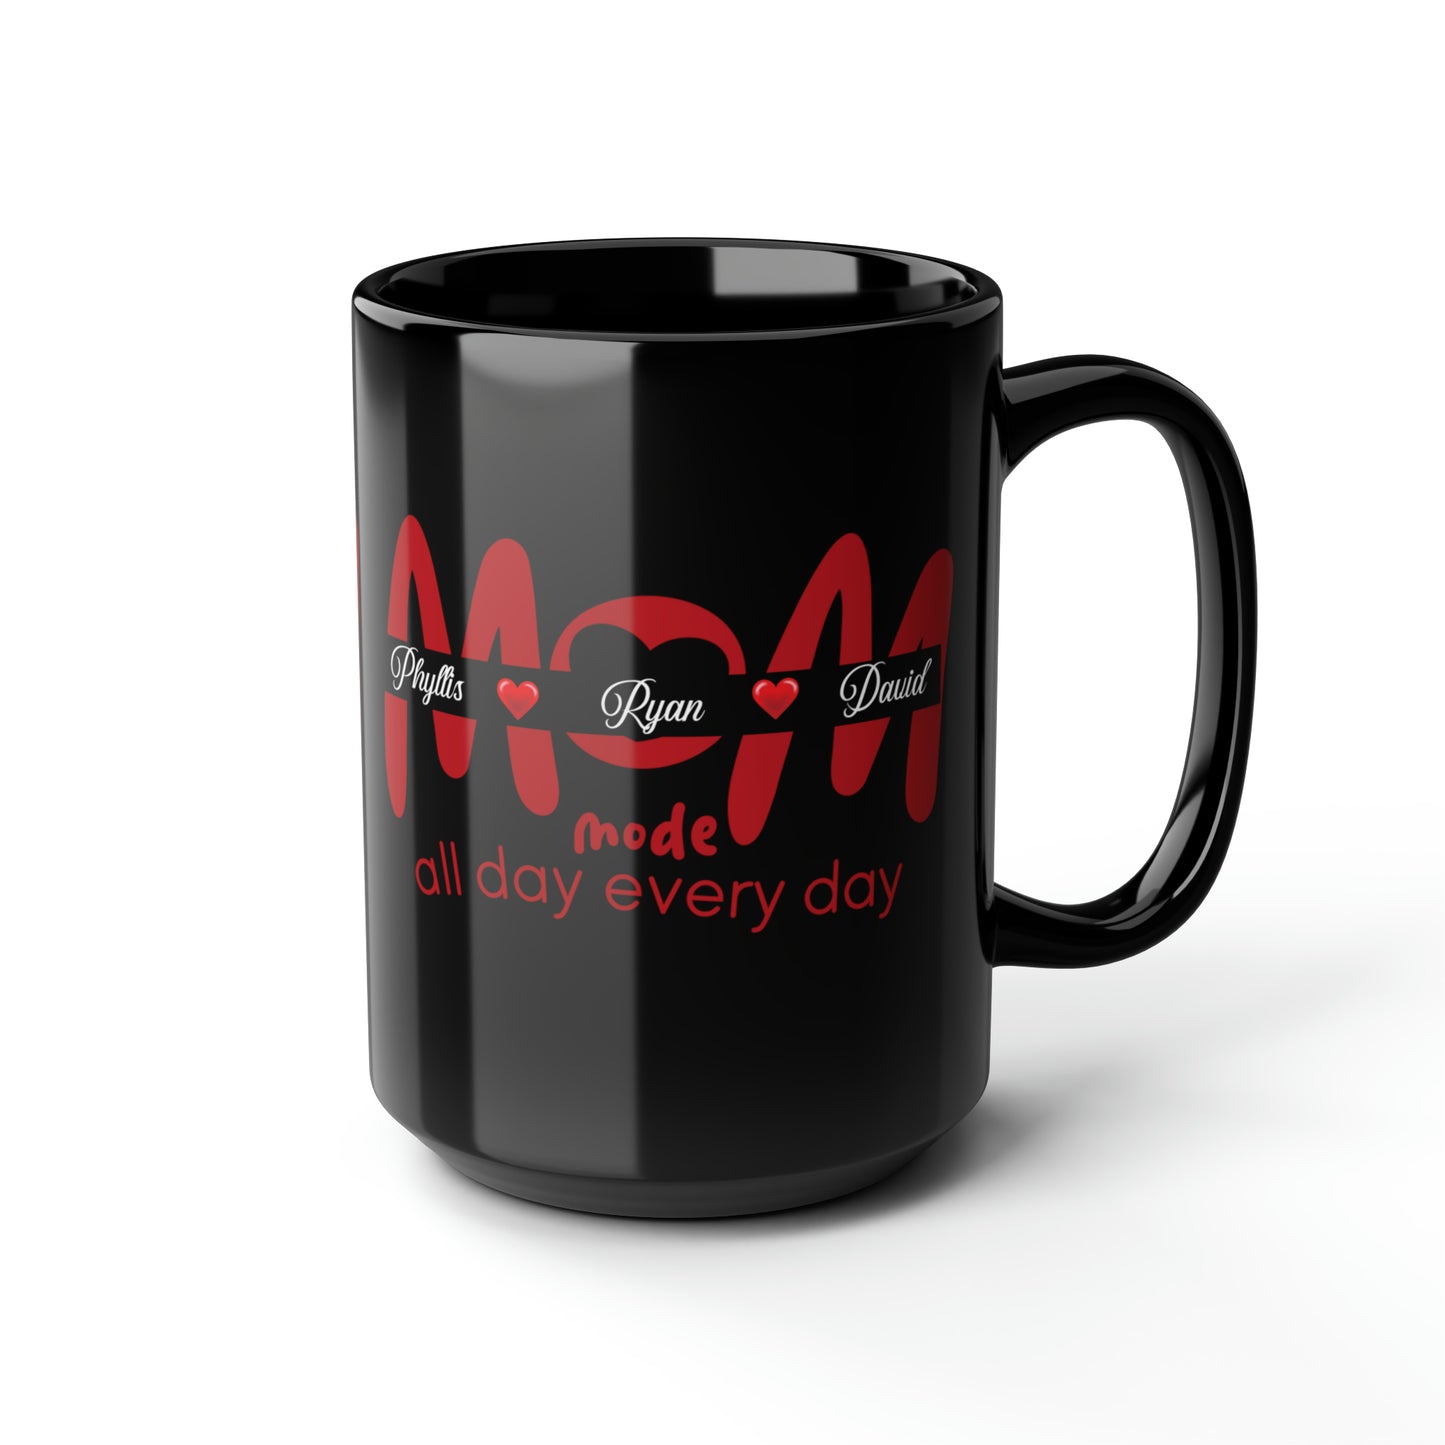 Personalized Mom Coffee Mug with kids names, Valentine's Day gift, Mother's Day gift, Mom birthday gift, mom coffee mug, Black Mug, 15oz